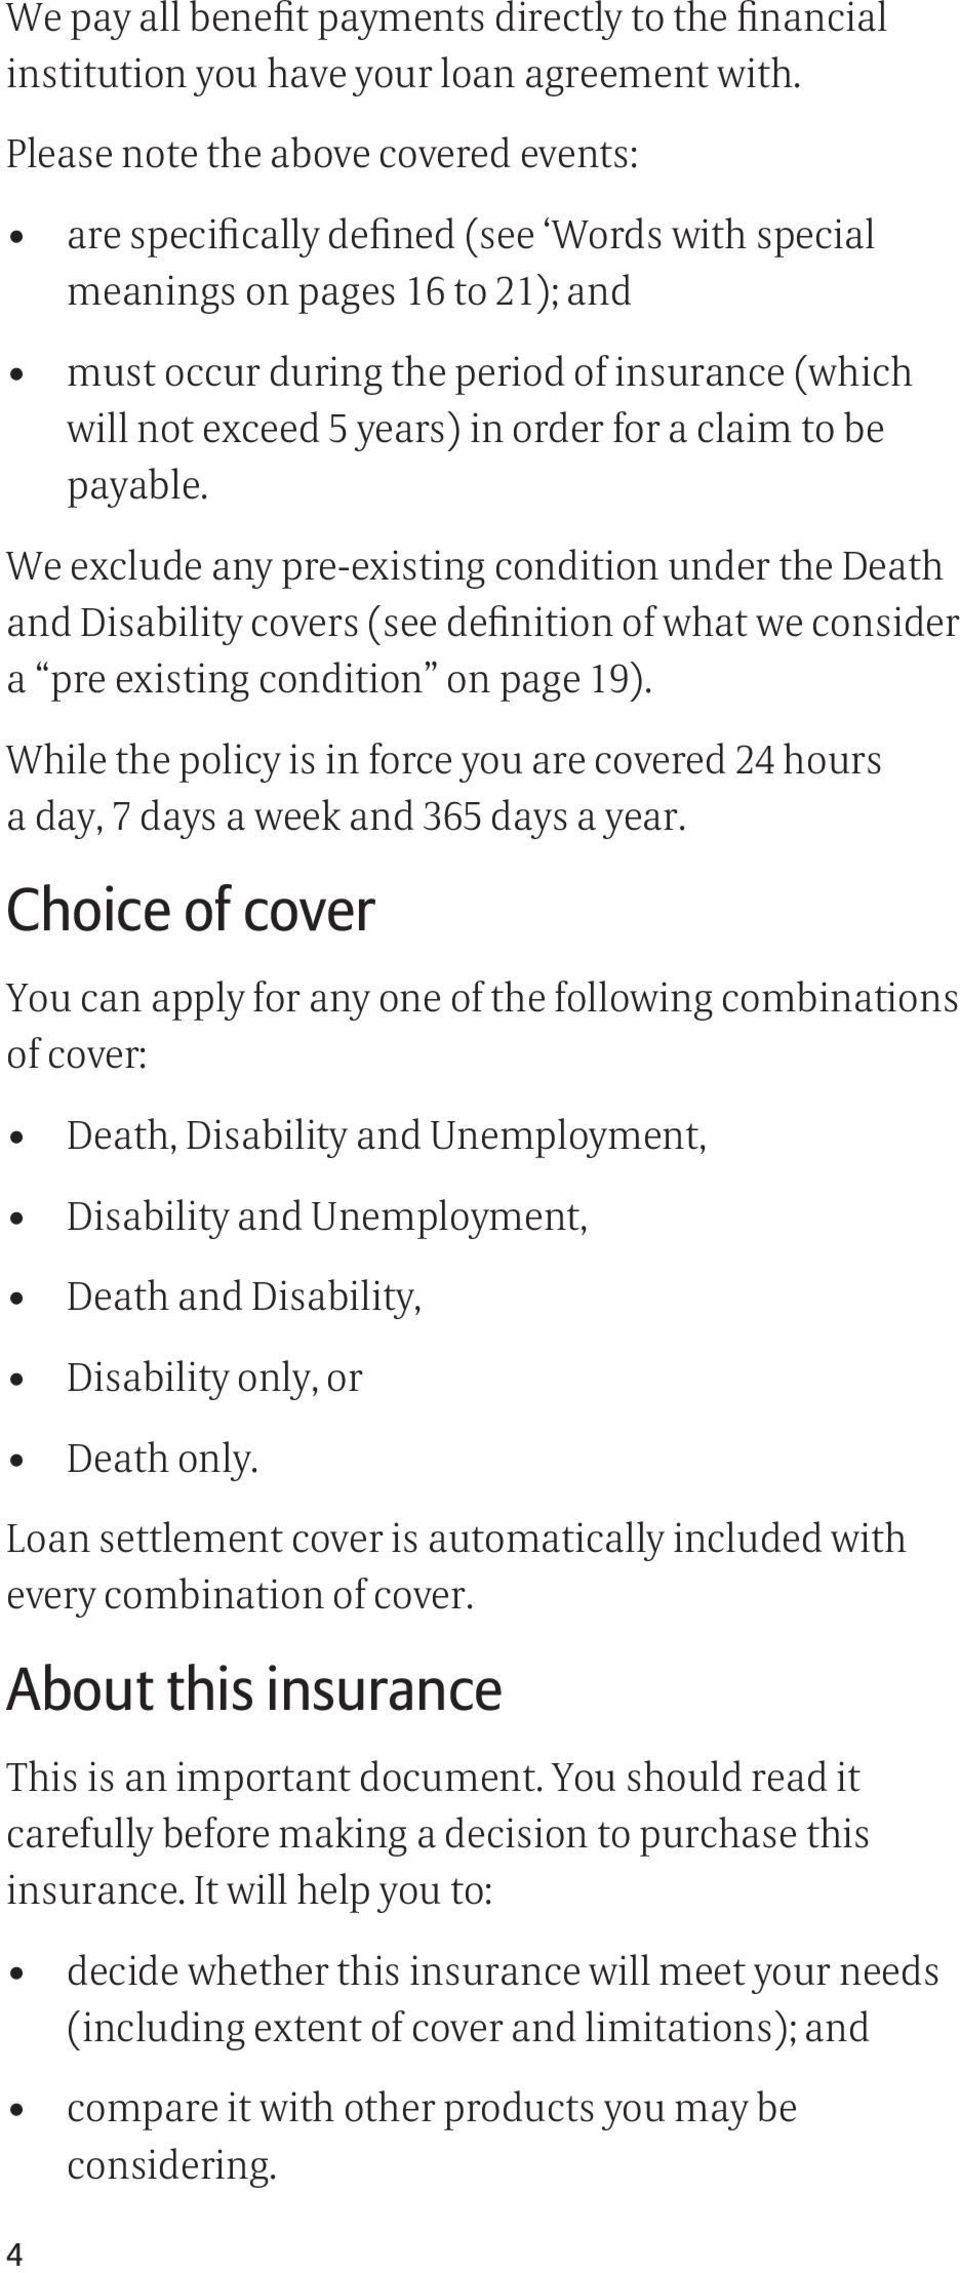 order for a claim to be payable. We exclude any pre-existing condition under the Death and Disability covers (see definition of what we consider a pre existing condition on page 19).